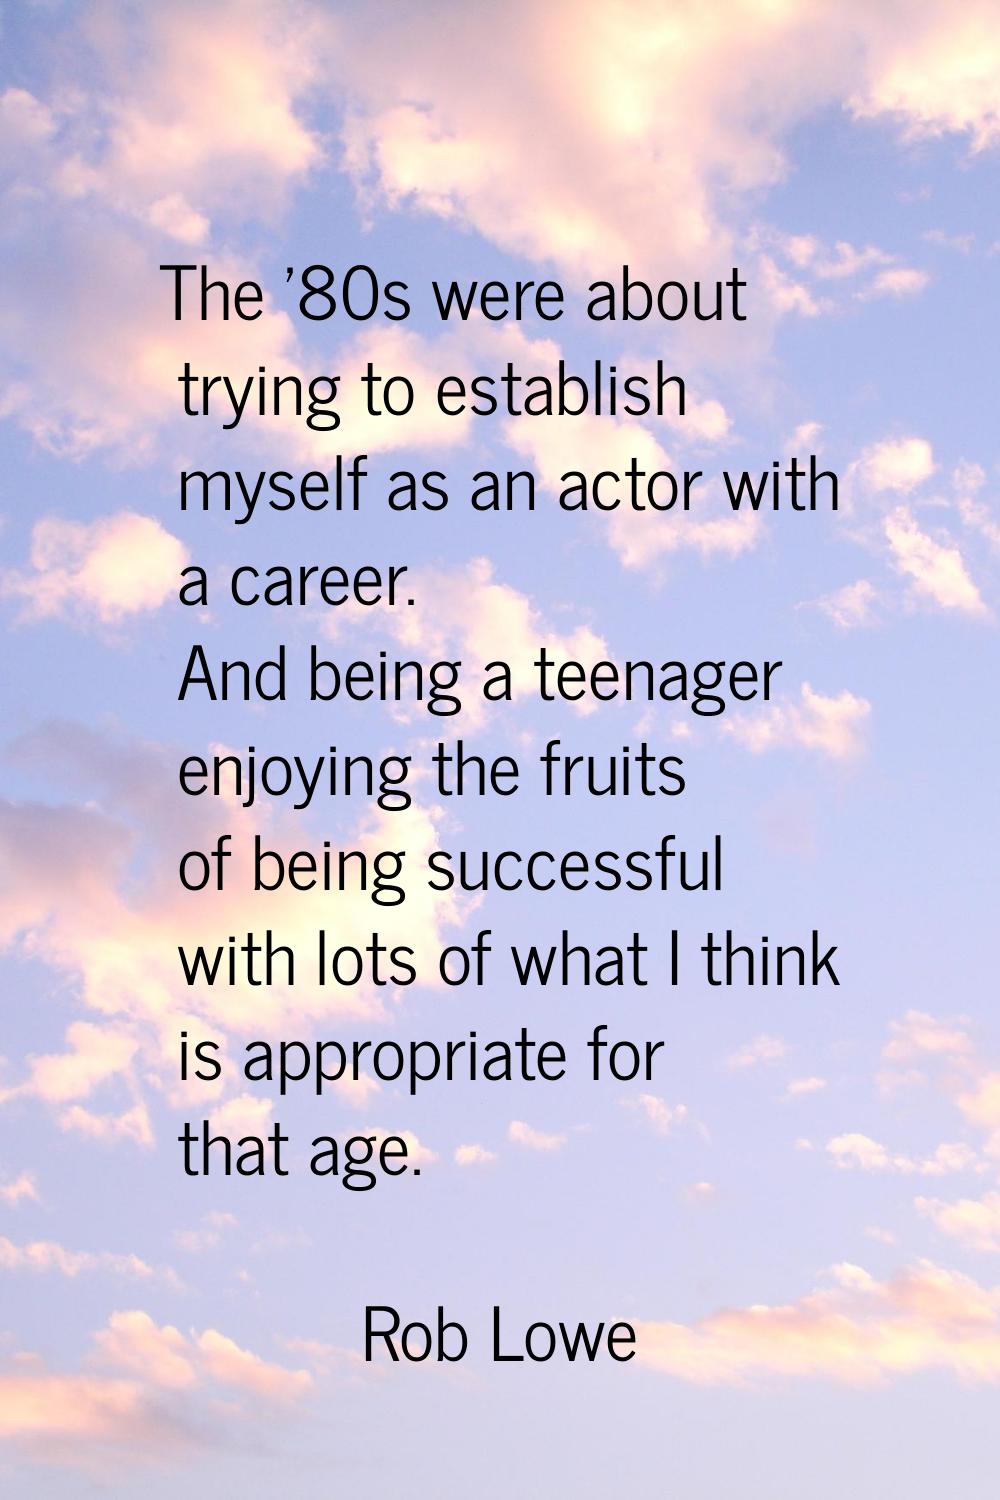 The '80s were about trying to establish myself as an actor with a career. And being a teenager enjo